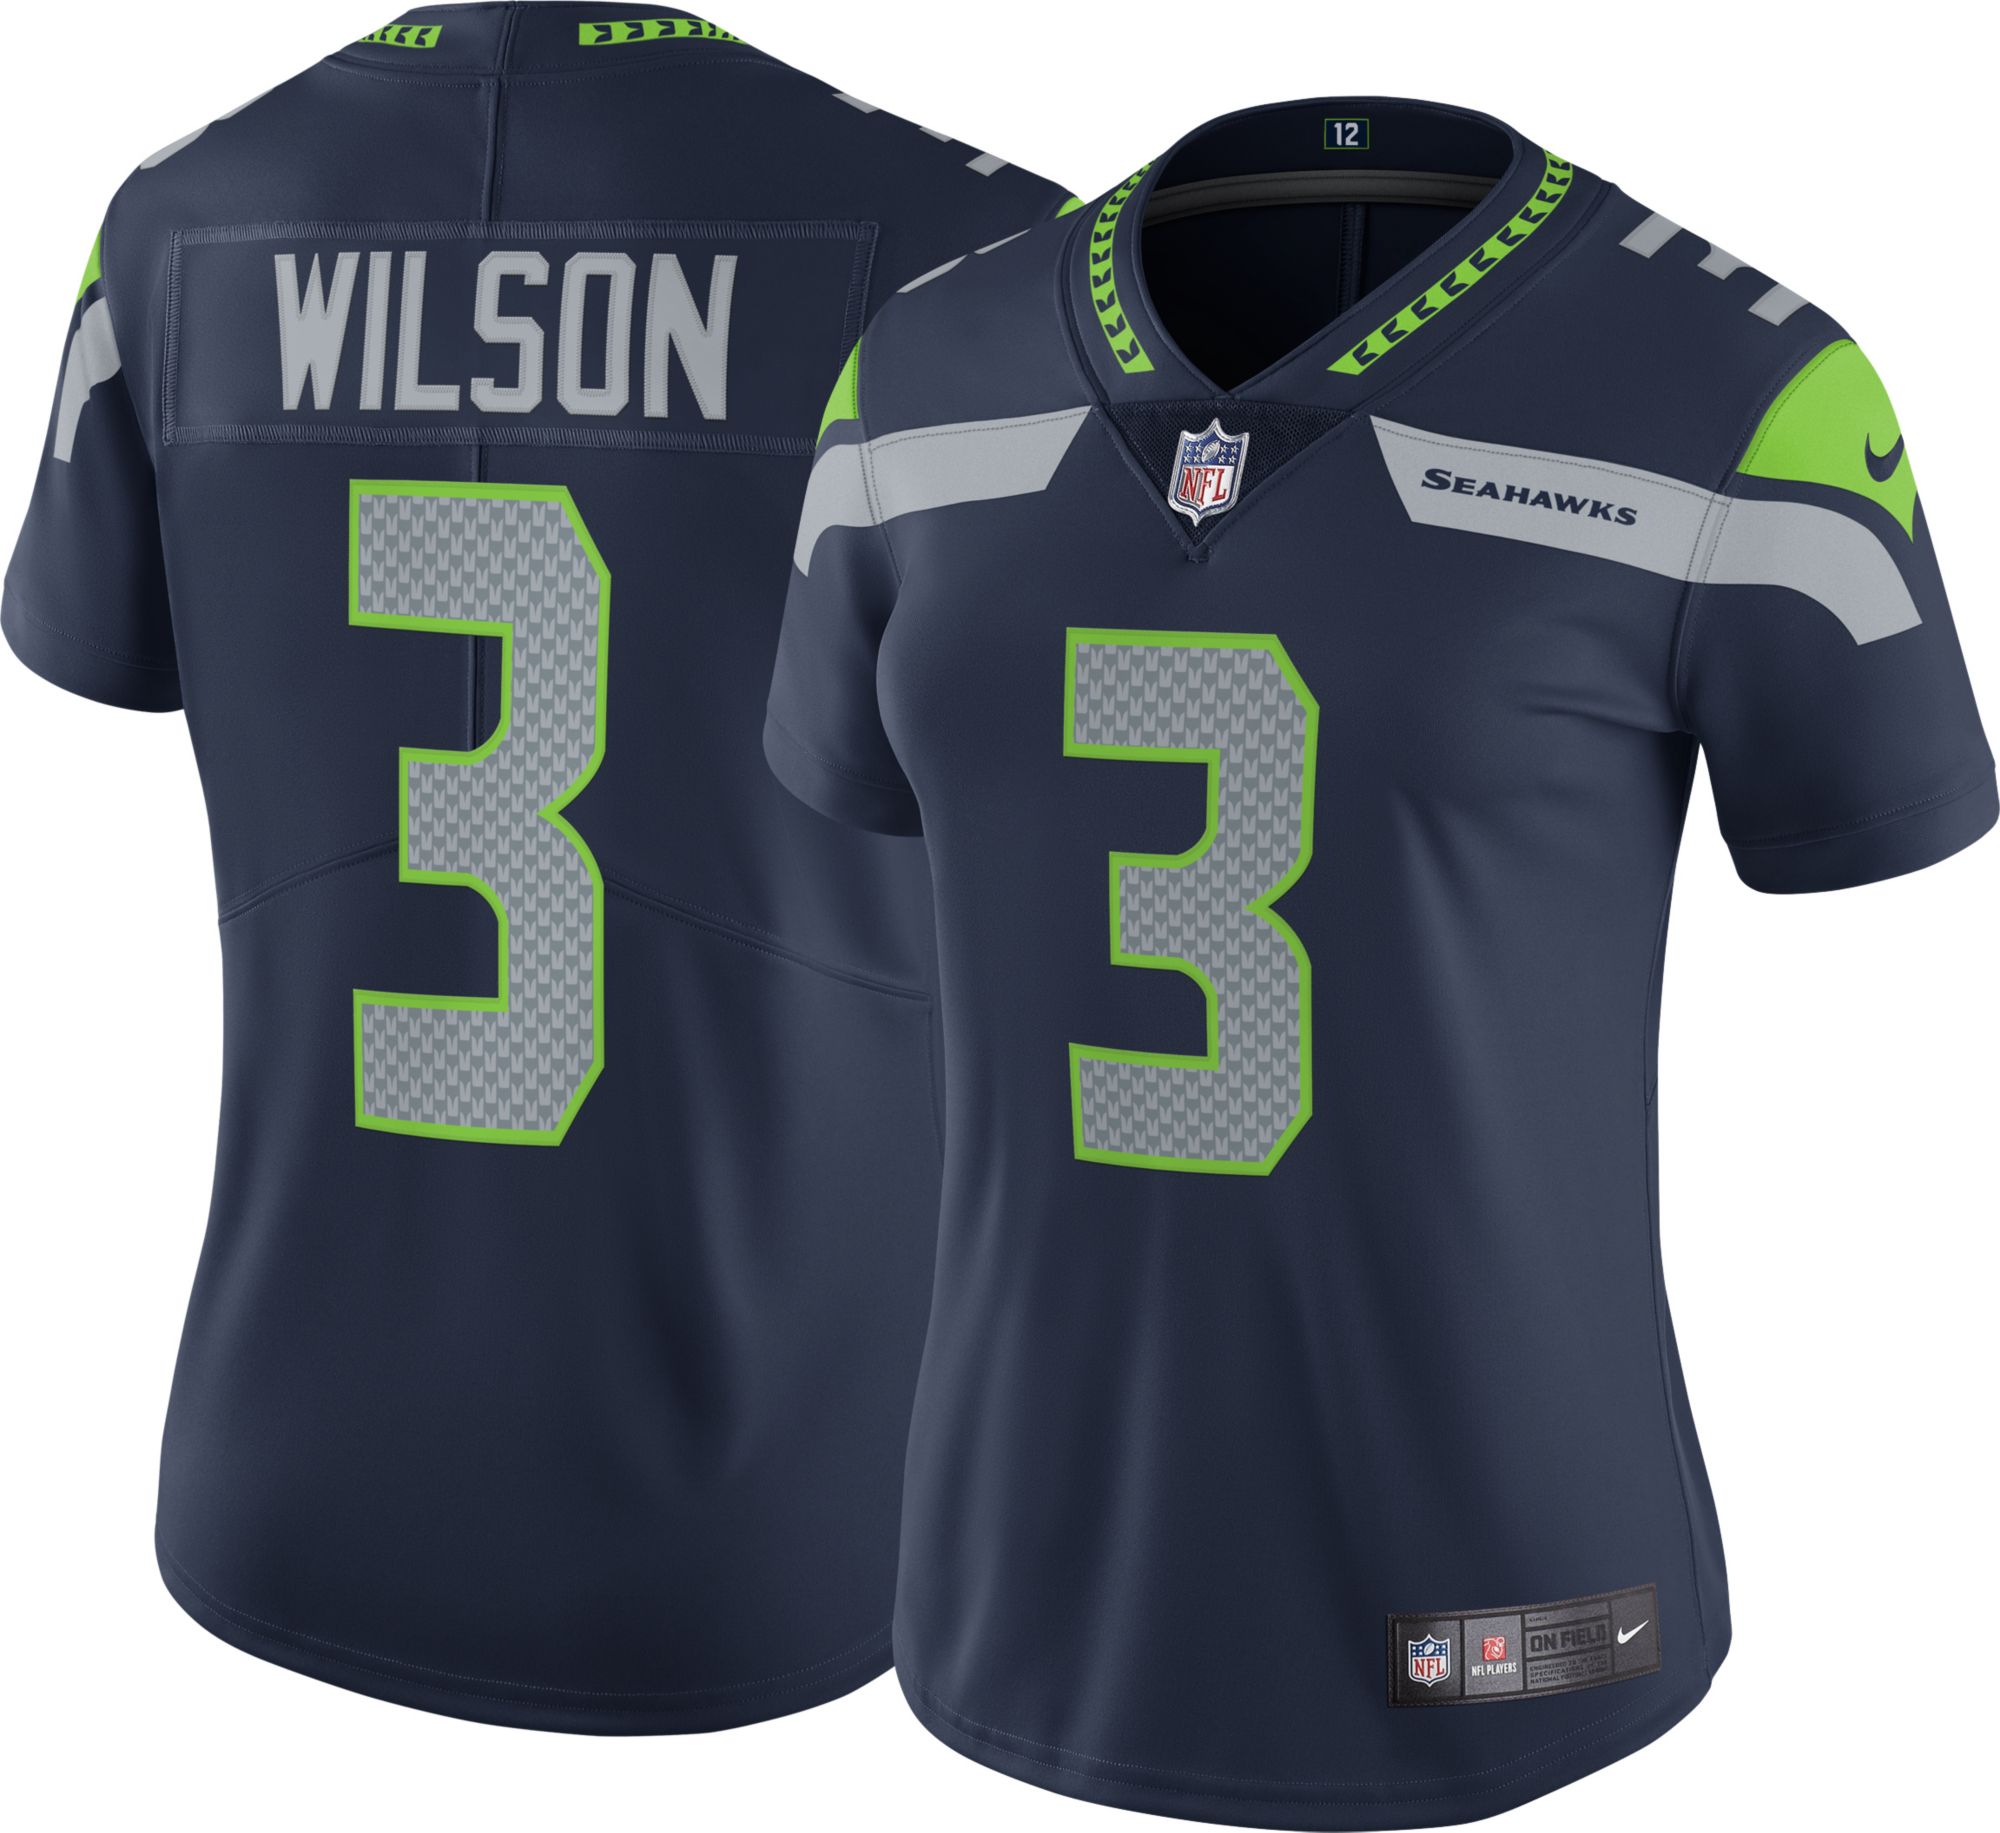 russell wilson jersey youth large